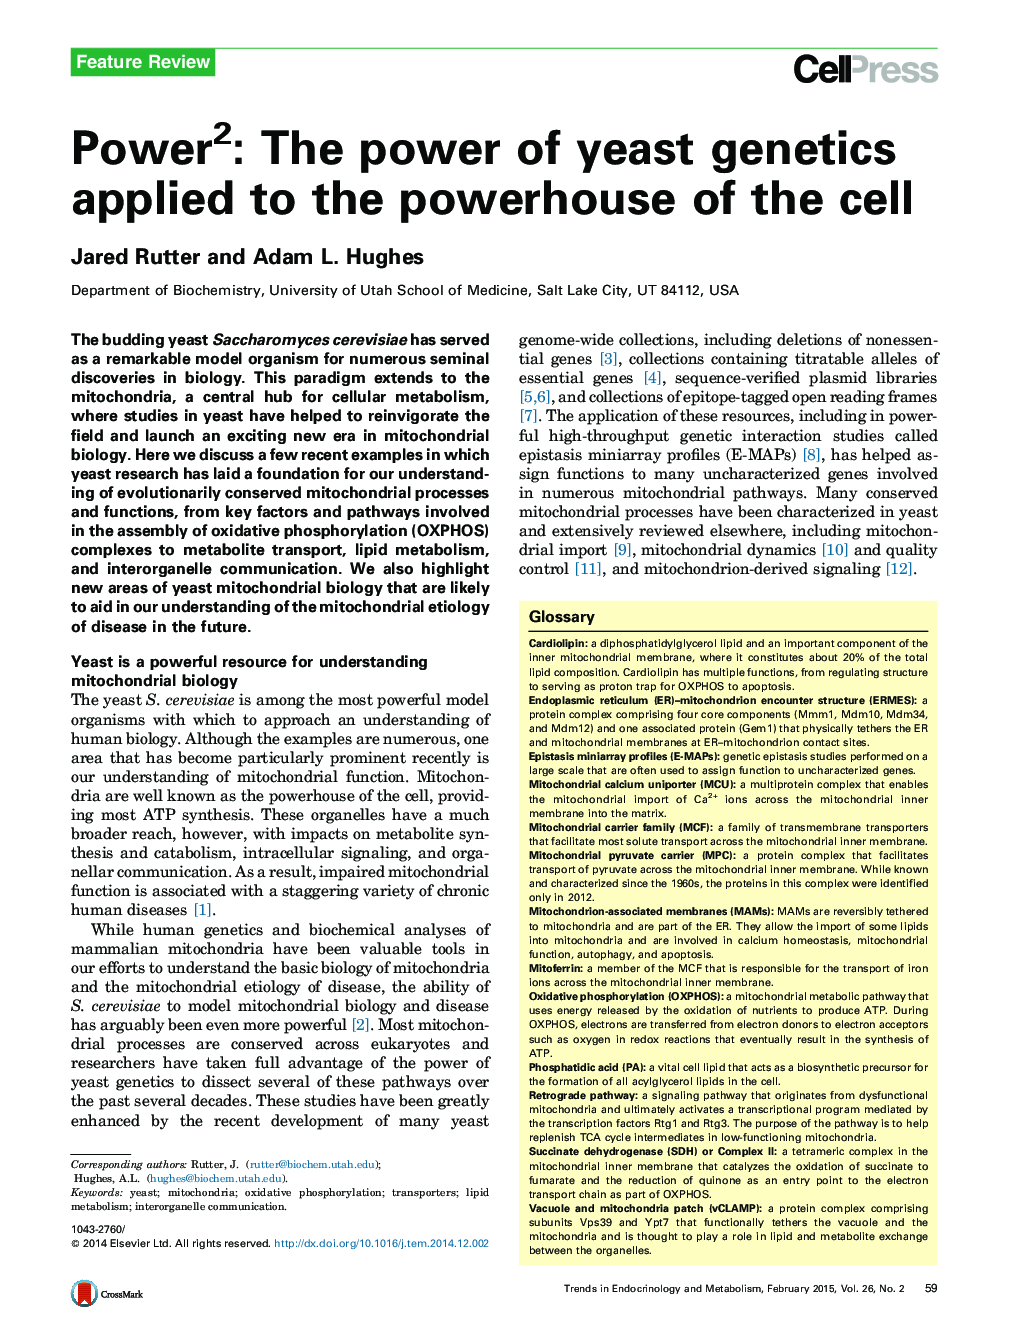 Power2: The power of yeast genetics applied to the powerhouse of the cell